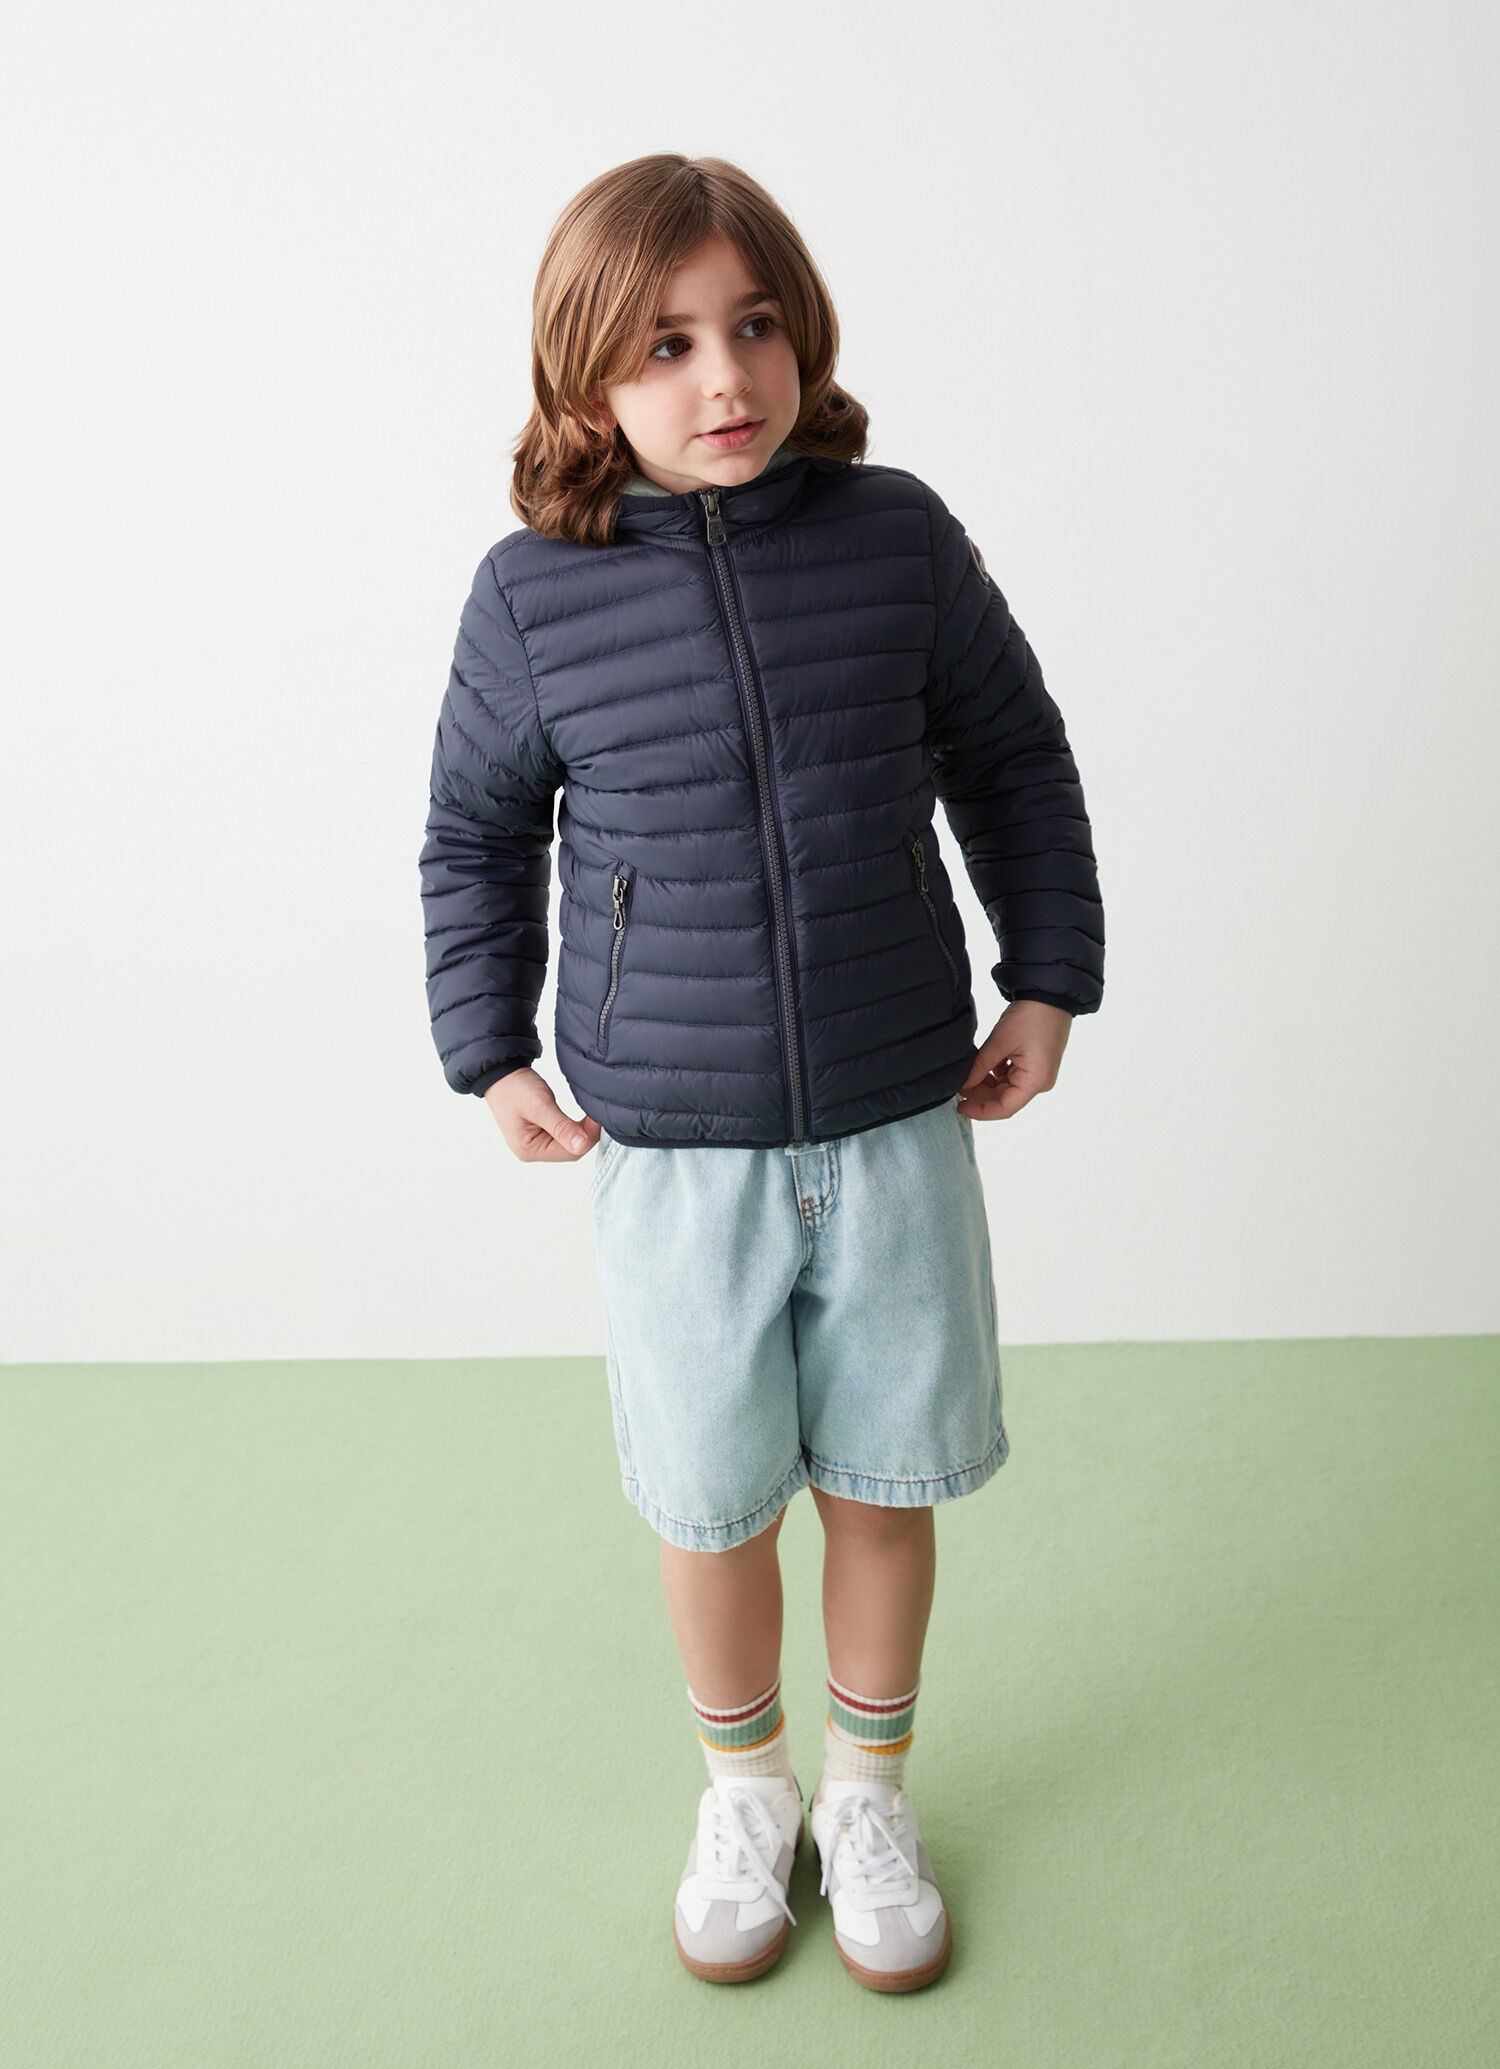 New arrivals clothing for boys and girls | Colmar EN